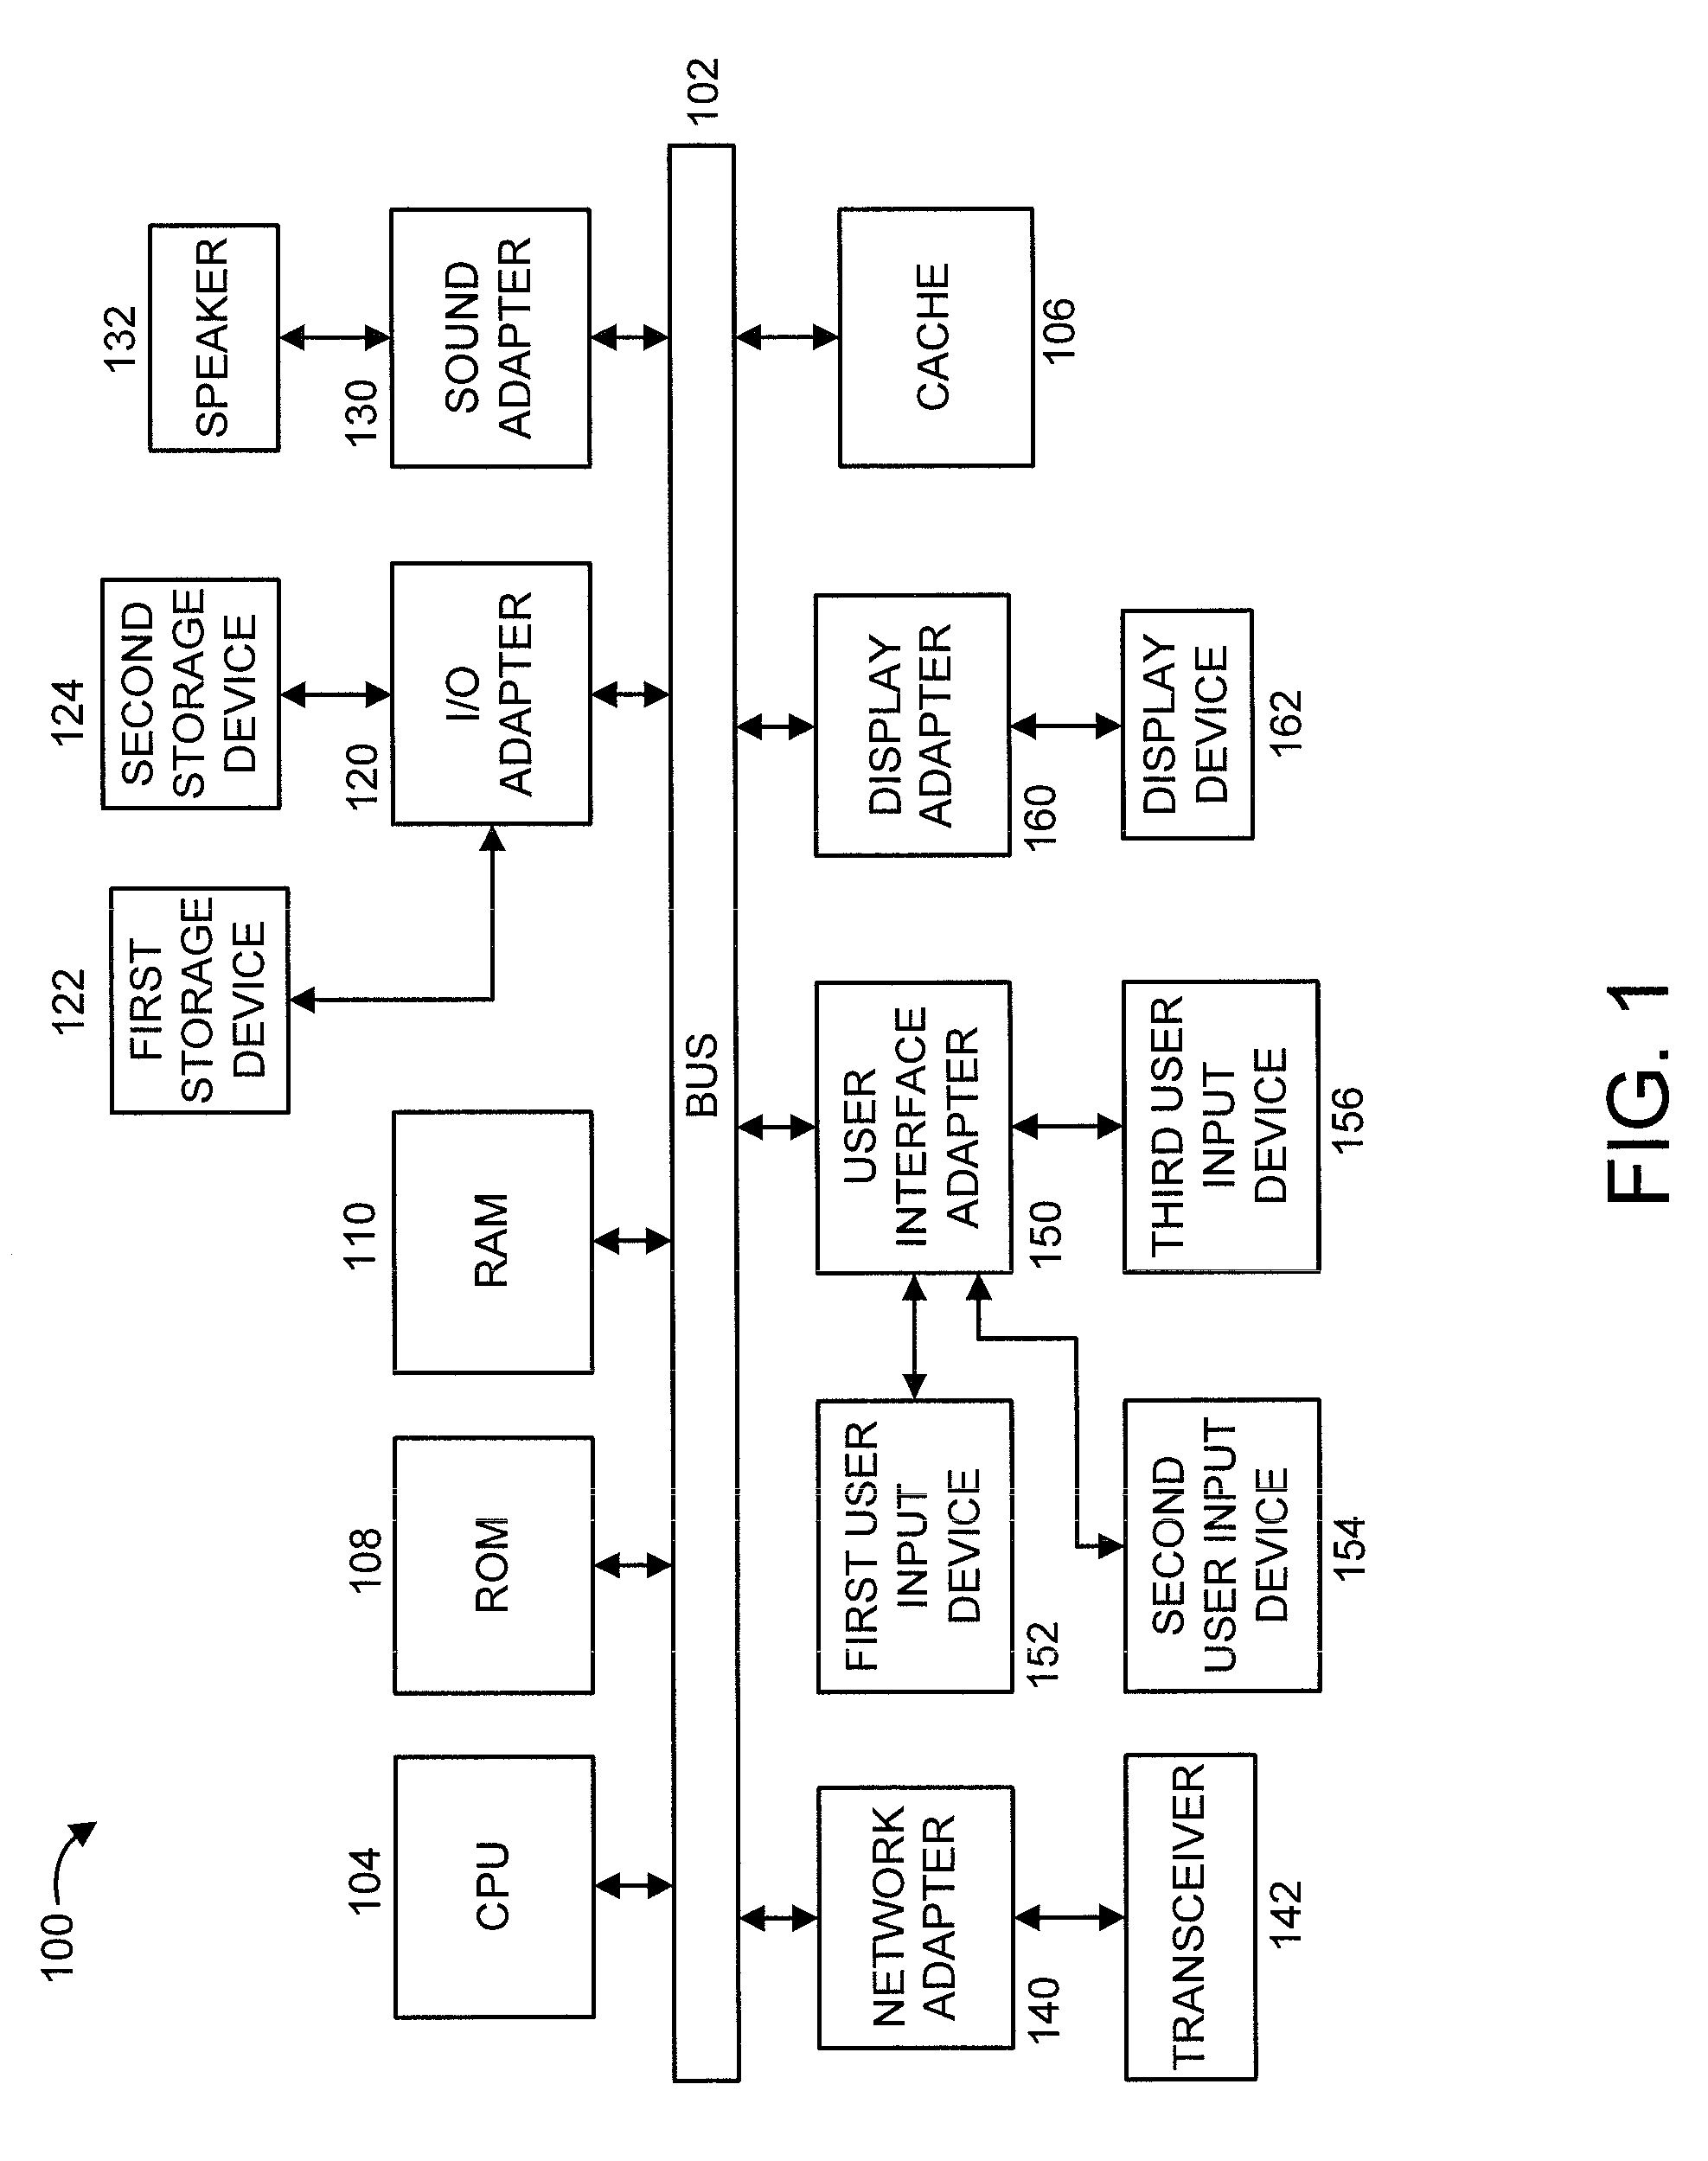 Large-Scale, Dynamic Graph Storage and Processing System